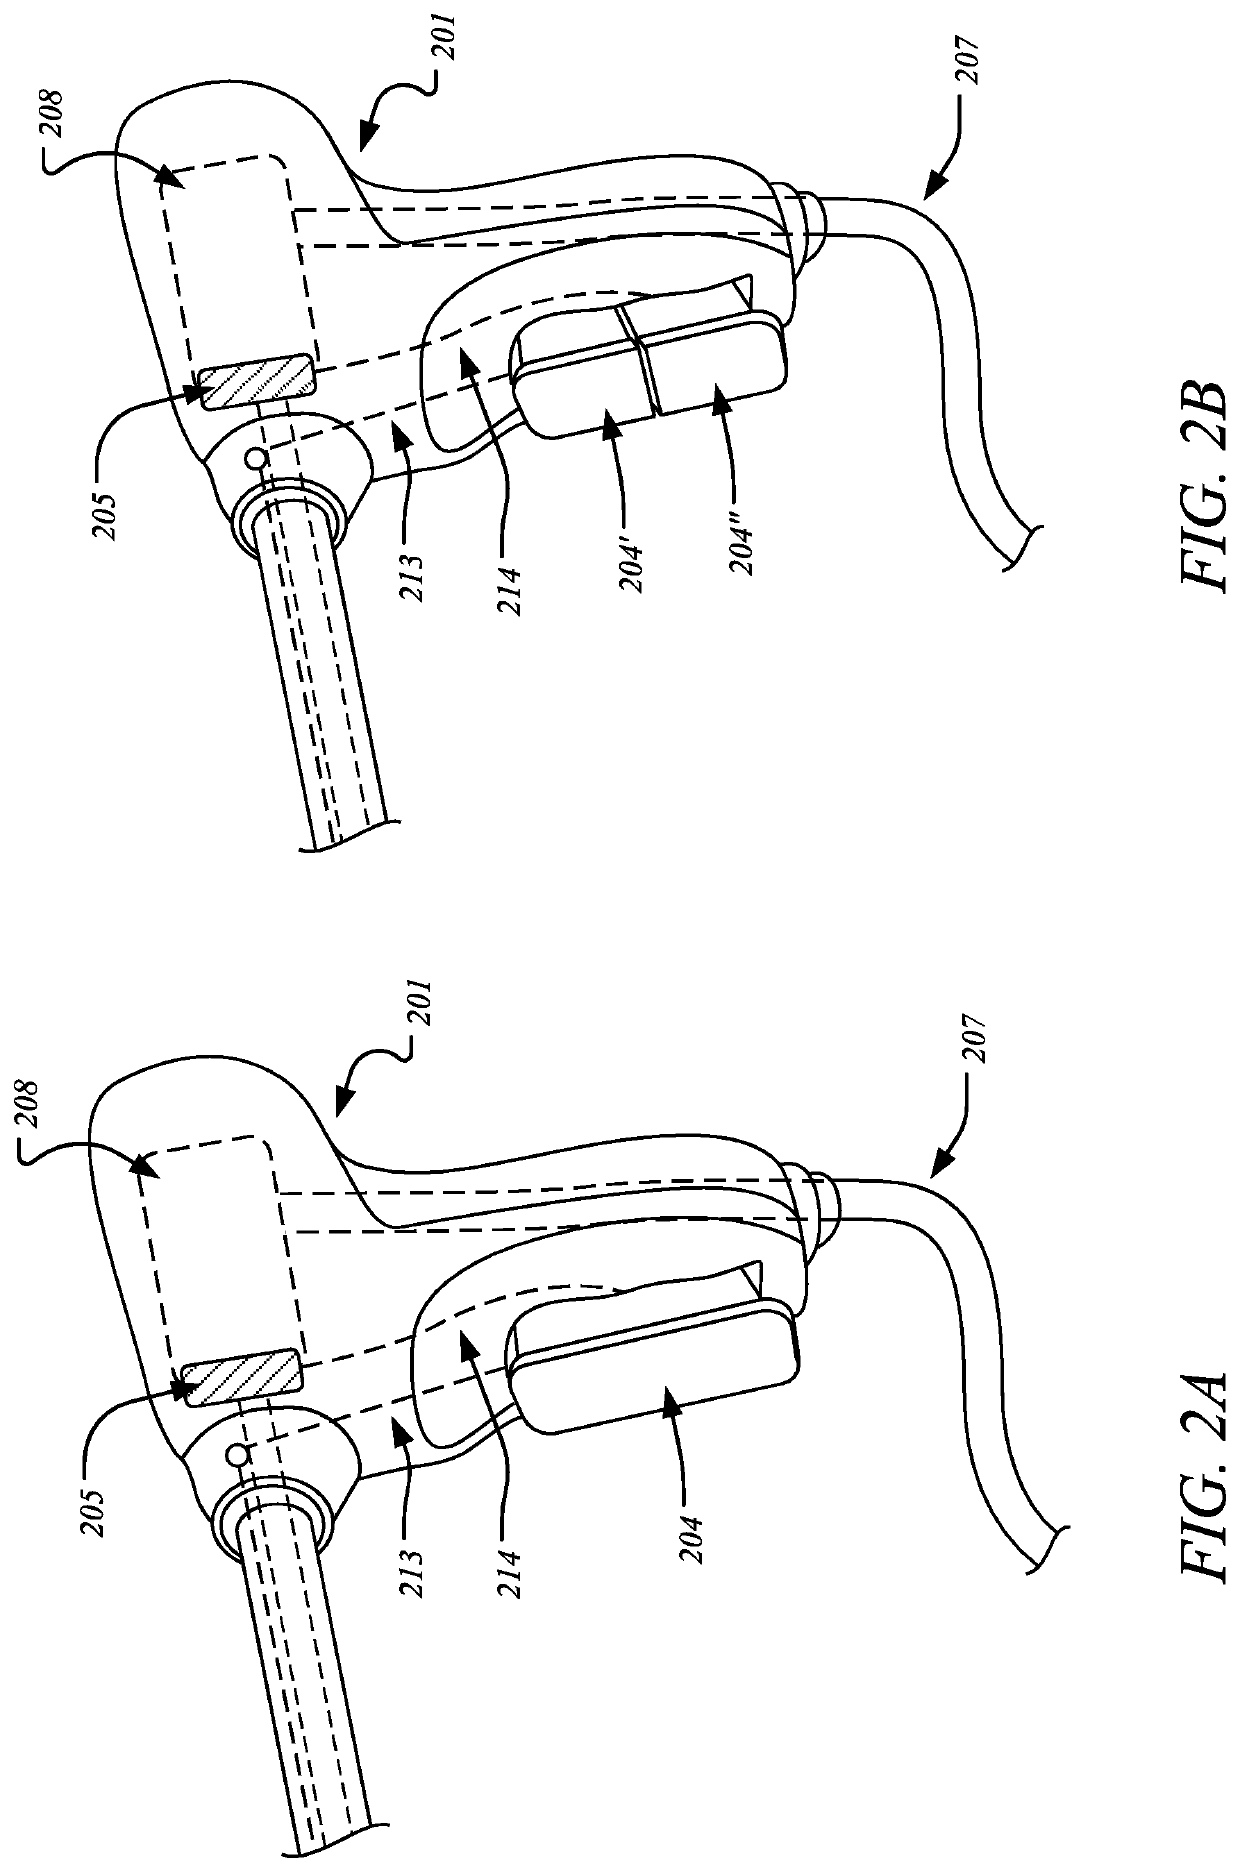 High-pressure steam-based surgical tool for cutting and hemostasis